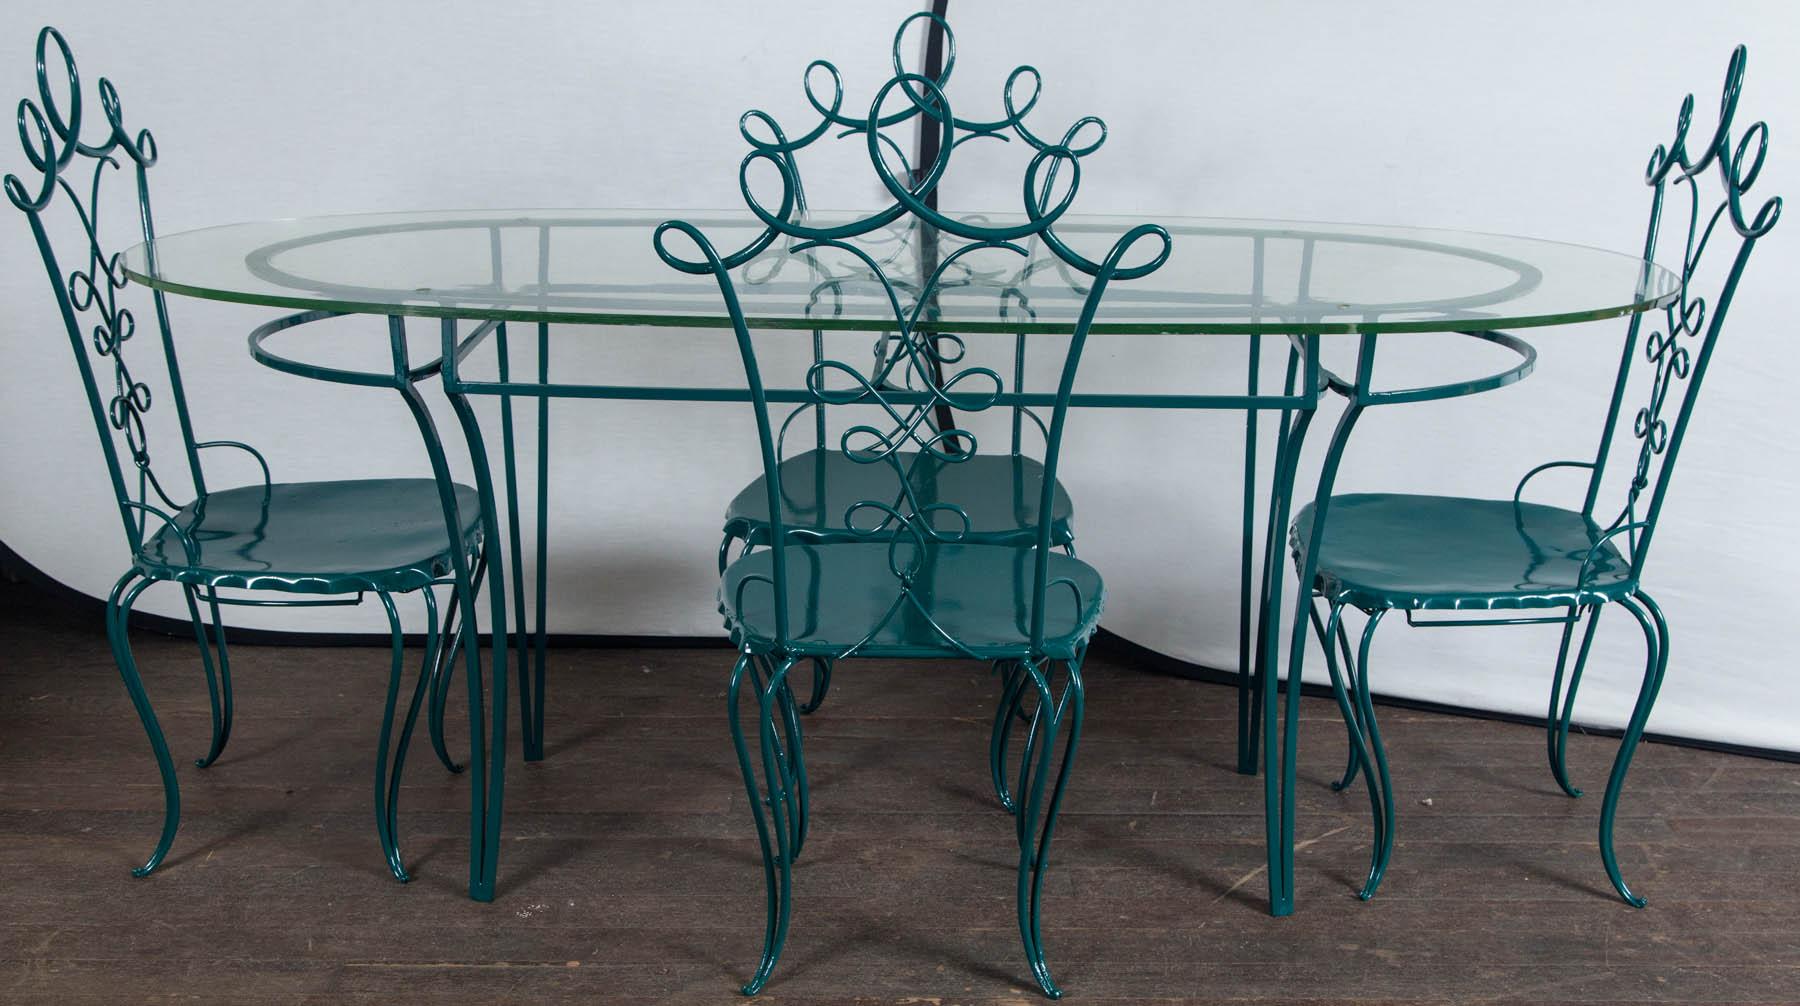 1940s French wrought iron garden table with and oval half inch thick glass top, four wrought iron looped chairs after René Prou. Four drilled holes on top line up with holes on iron base. Newly professionally refinished in a green color. Measures: